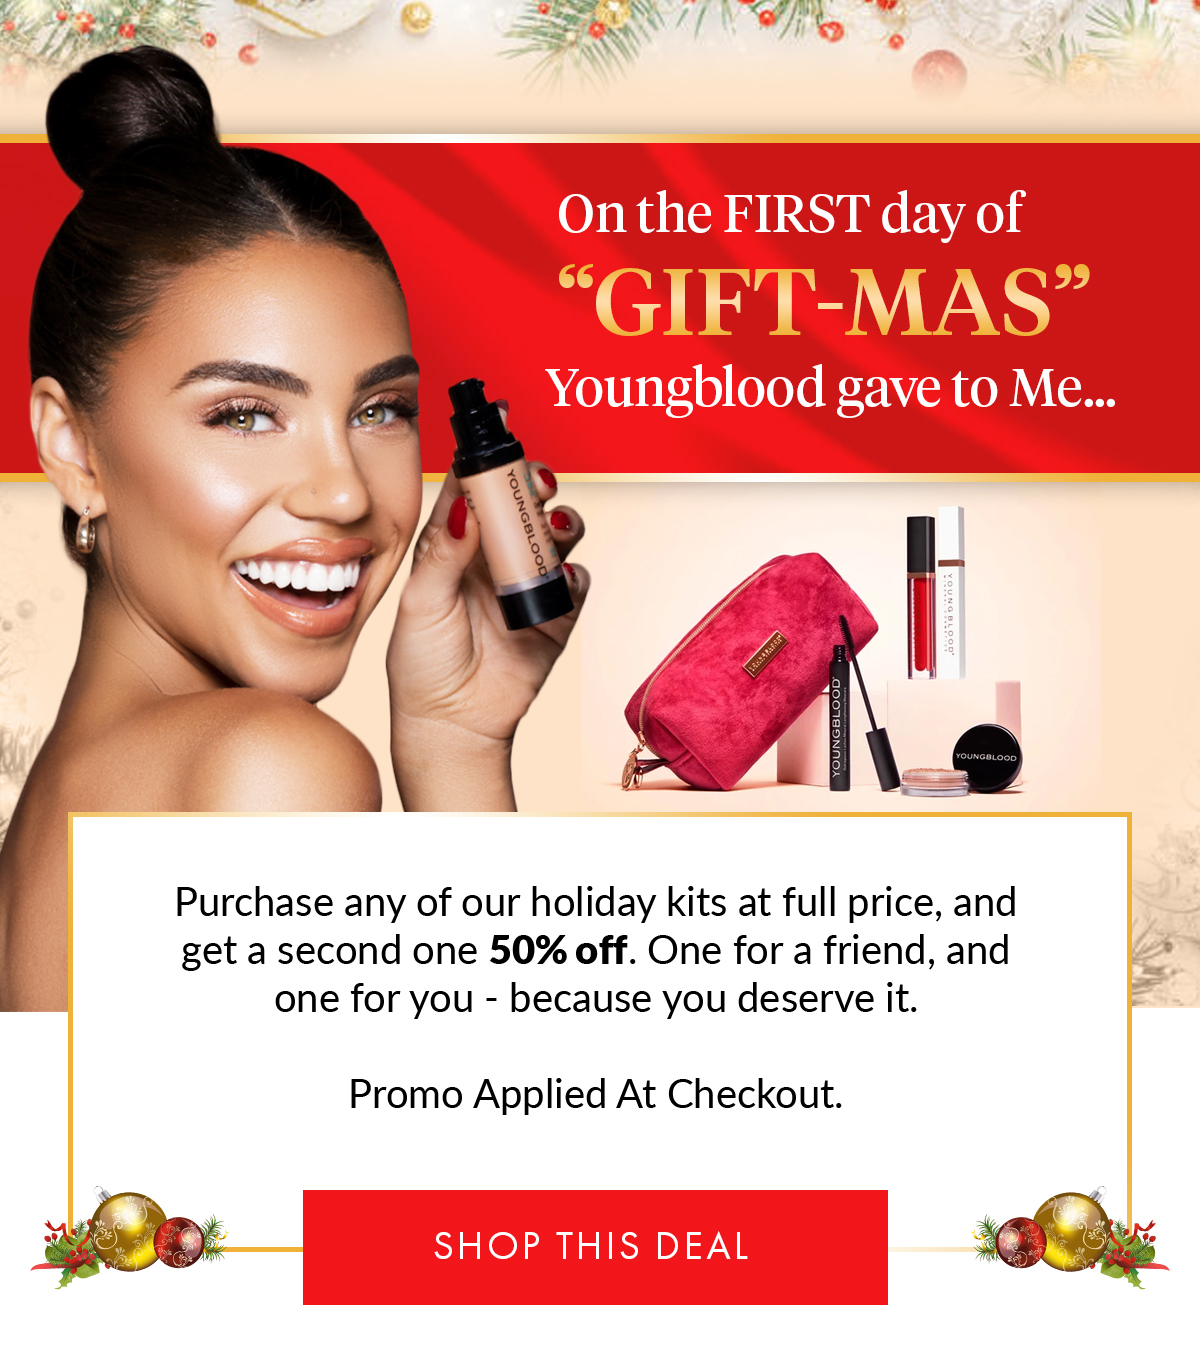 buy one holiday kit get second one 50% off